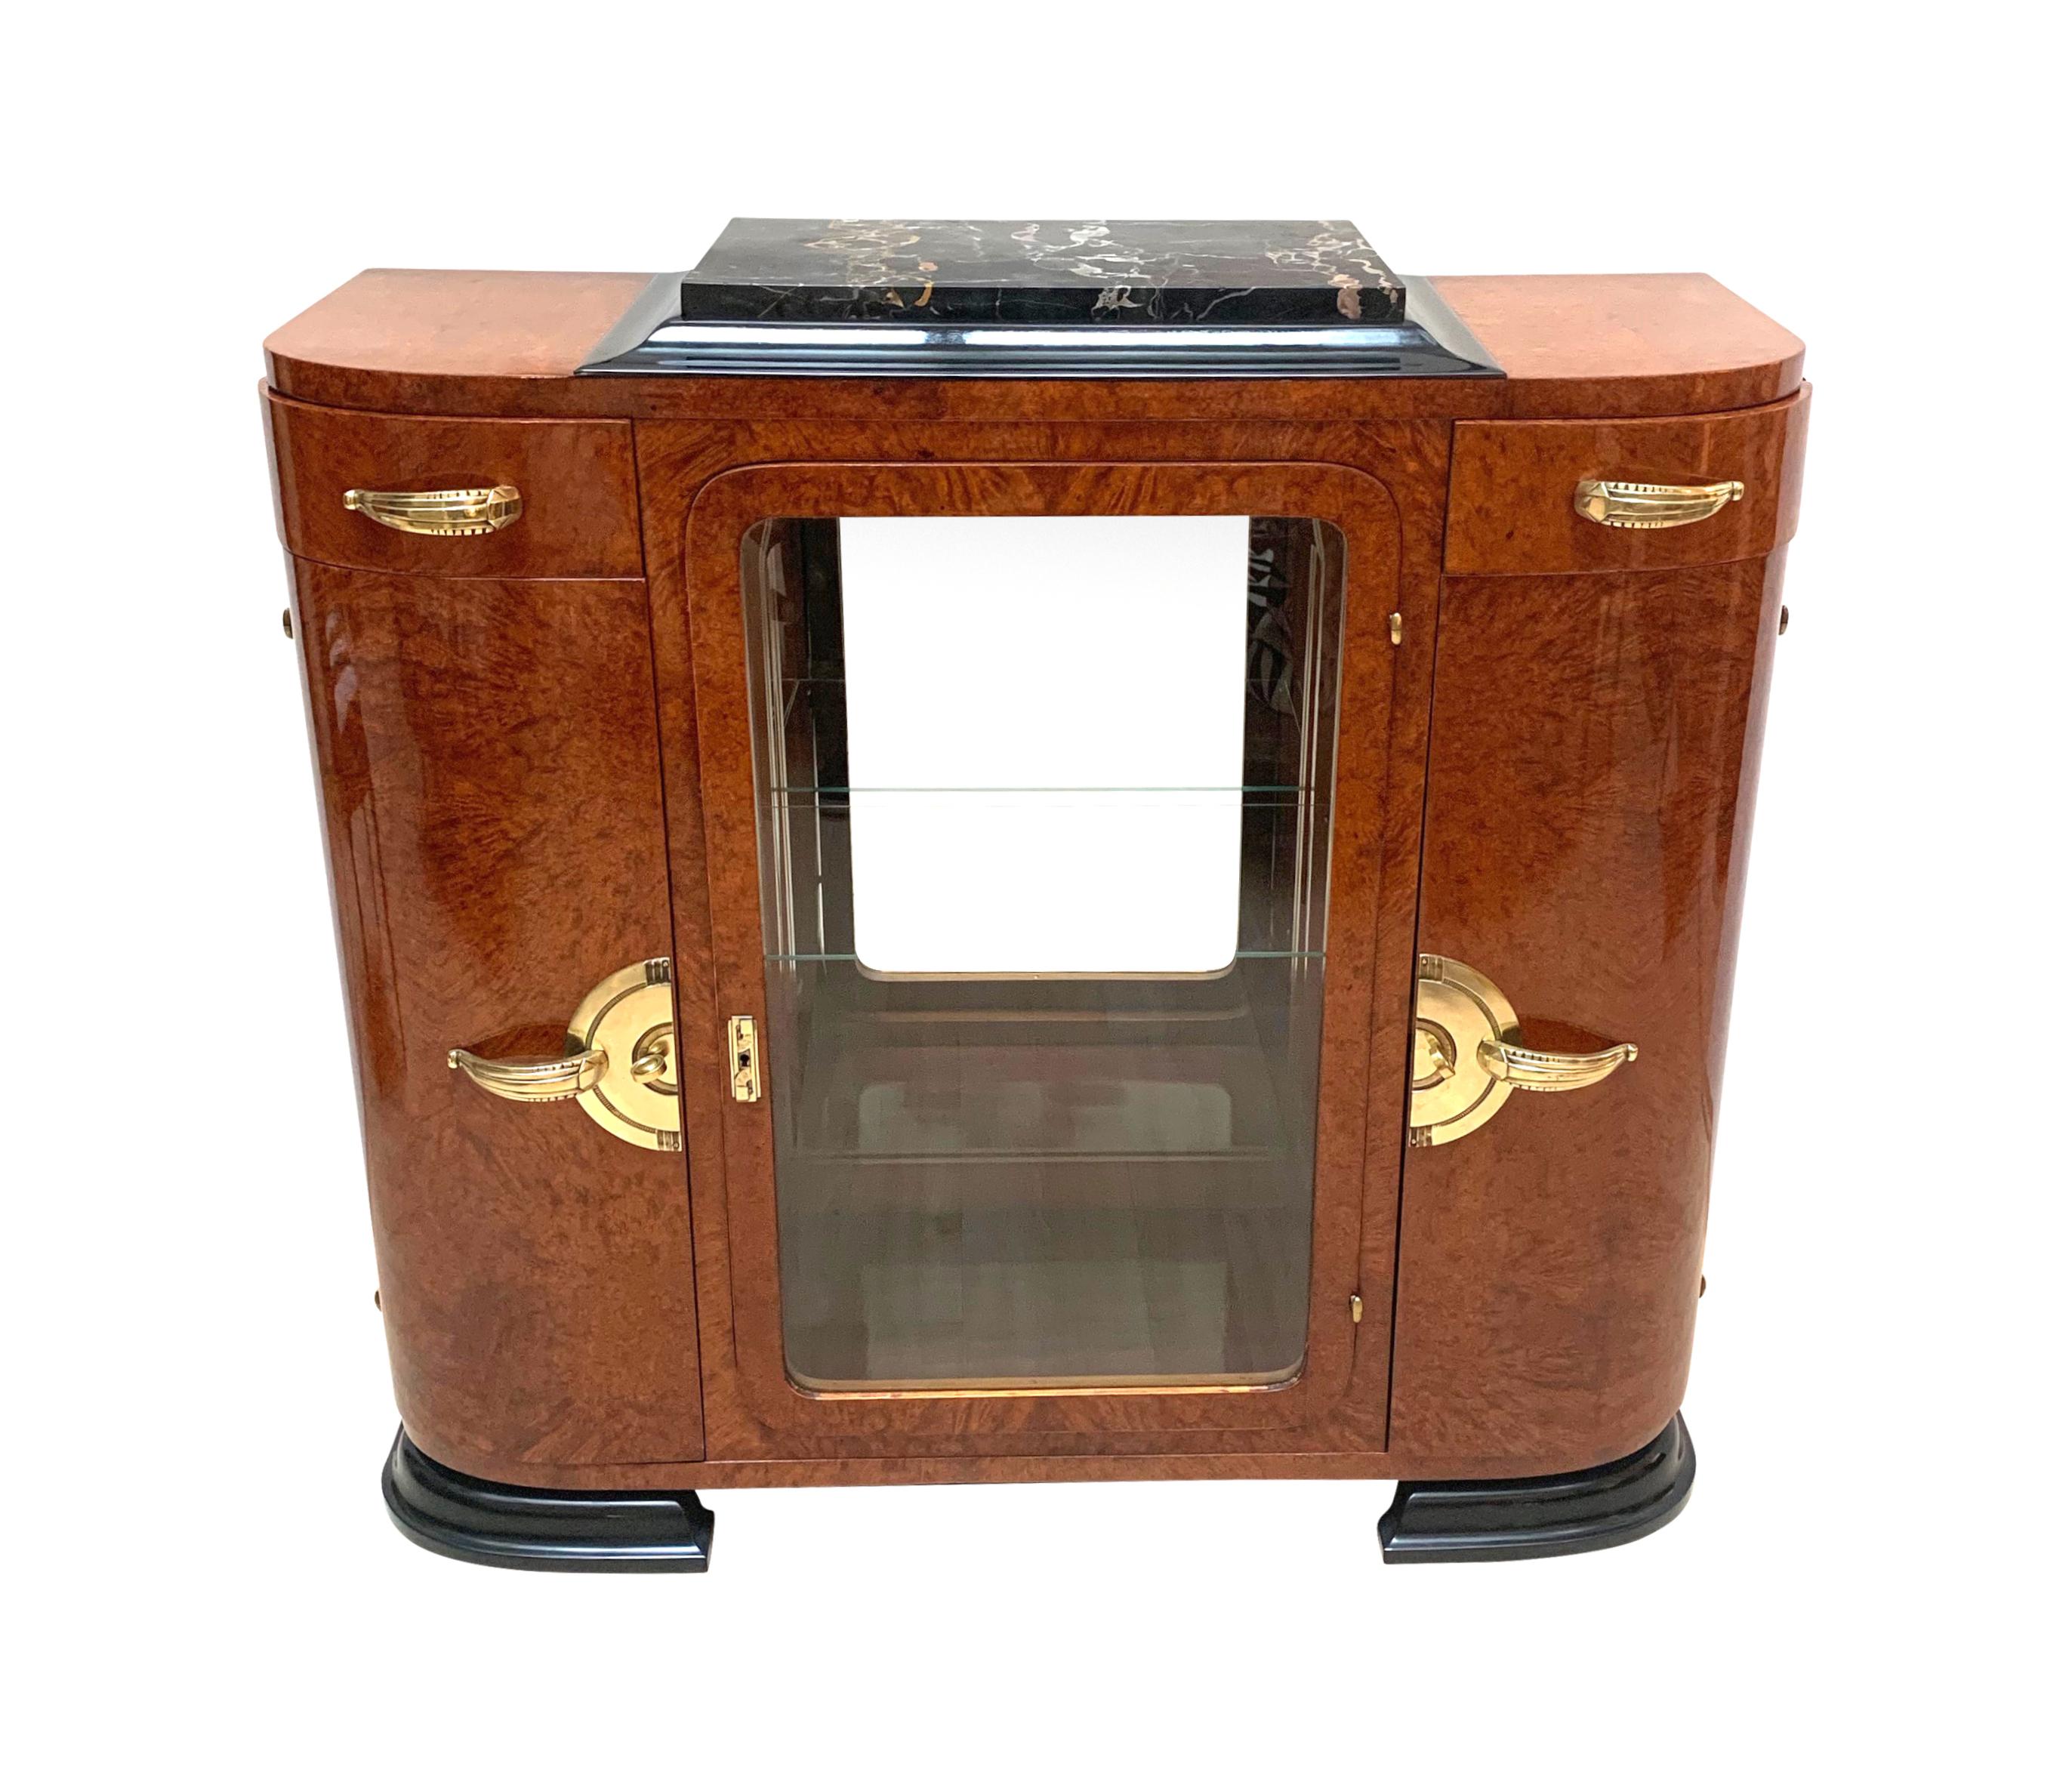 Gorgeous small Art Deco sideboard with open bar compartment in amazing Amboyna roots / burl veneer.
Three doors and two drawers. Two wooden doors with three shelf compartments inside. The middle vitrine door is made with a amboyna frame and a glass